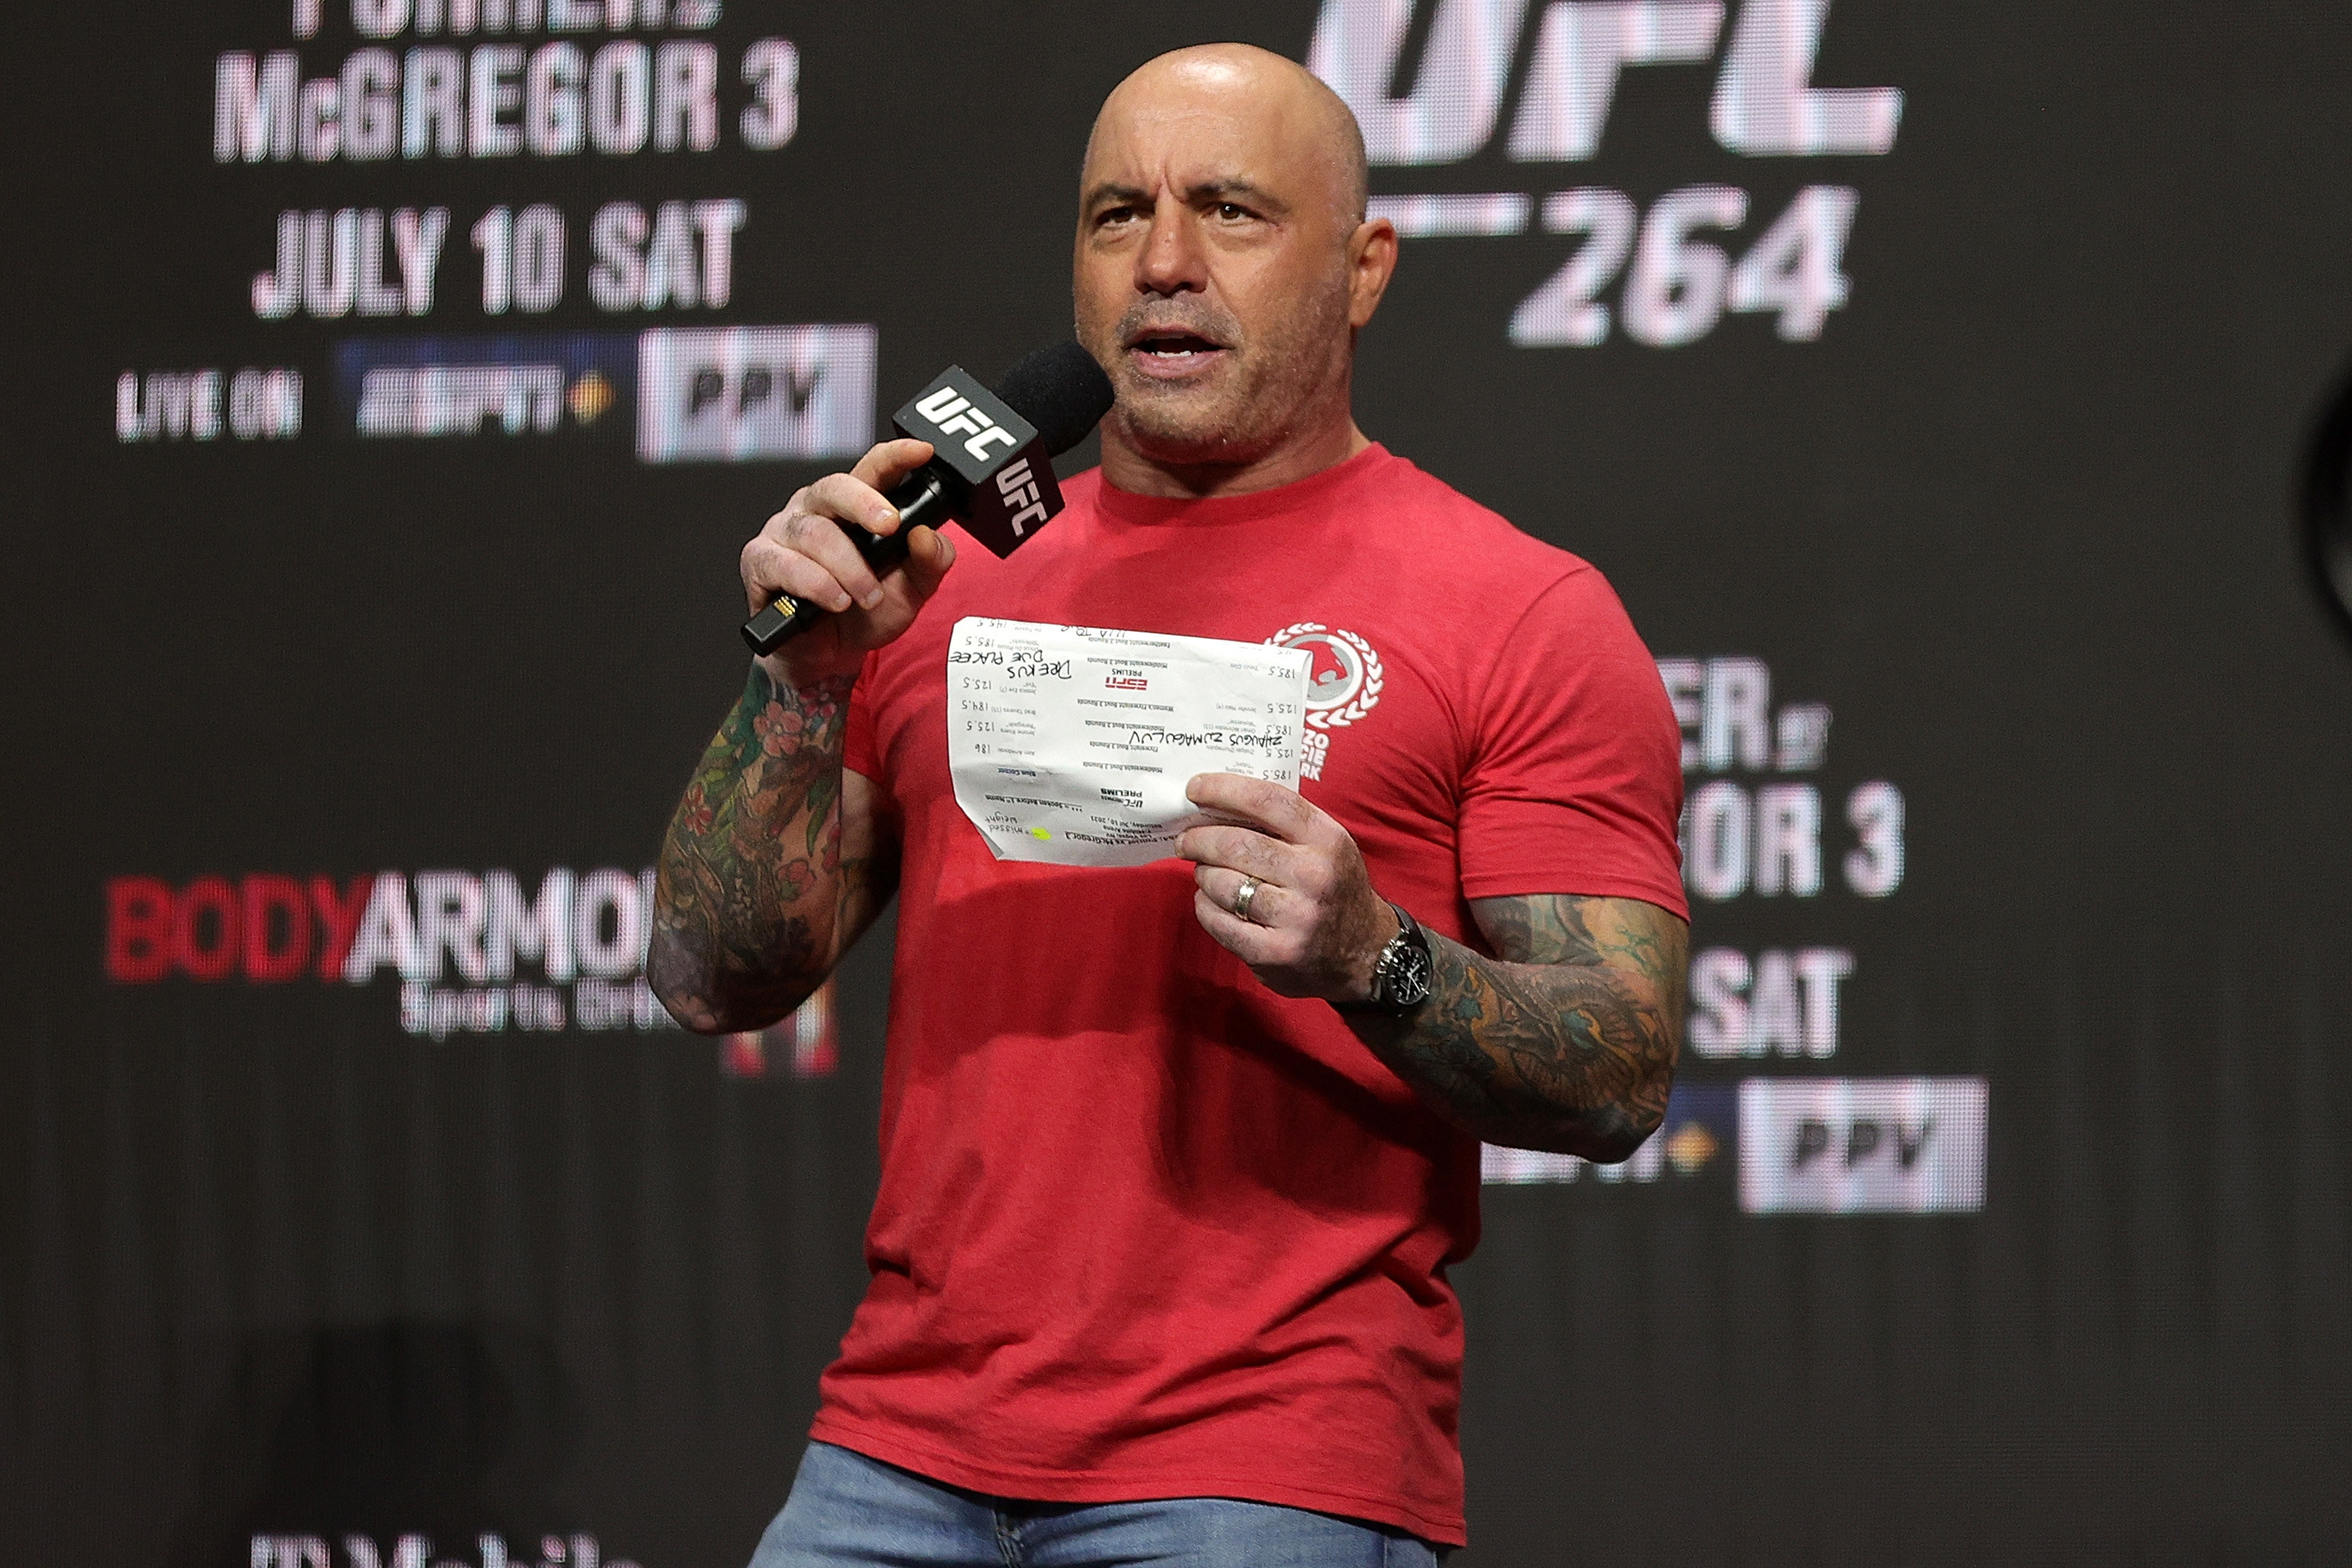 Photo of Joe Rogan at a UFC event with a microphone